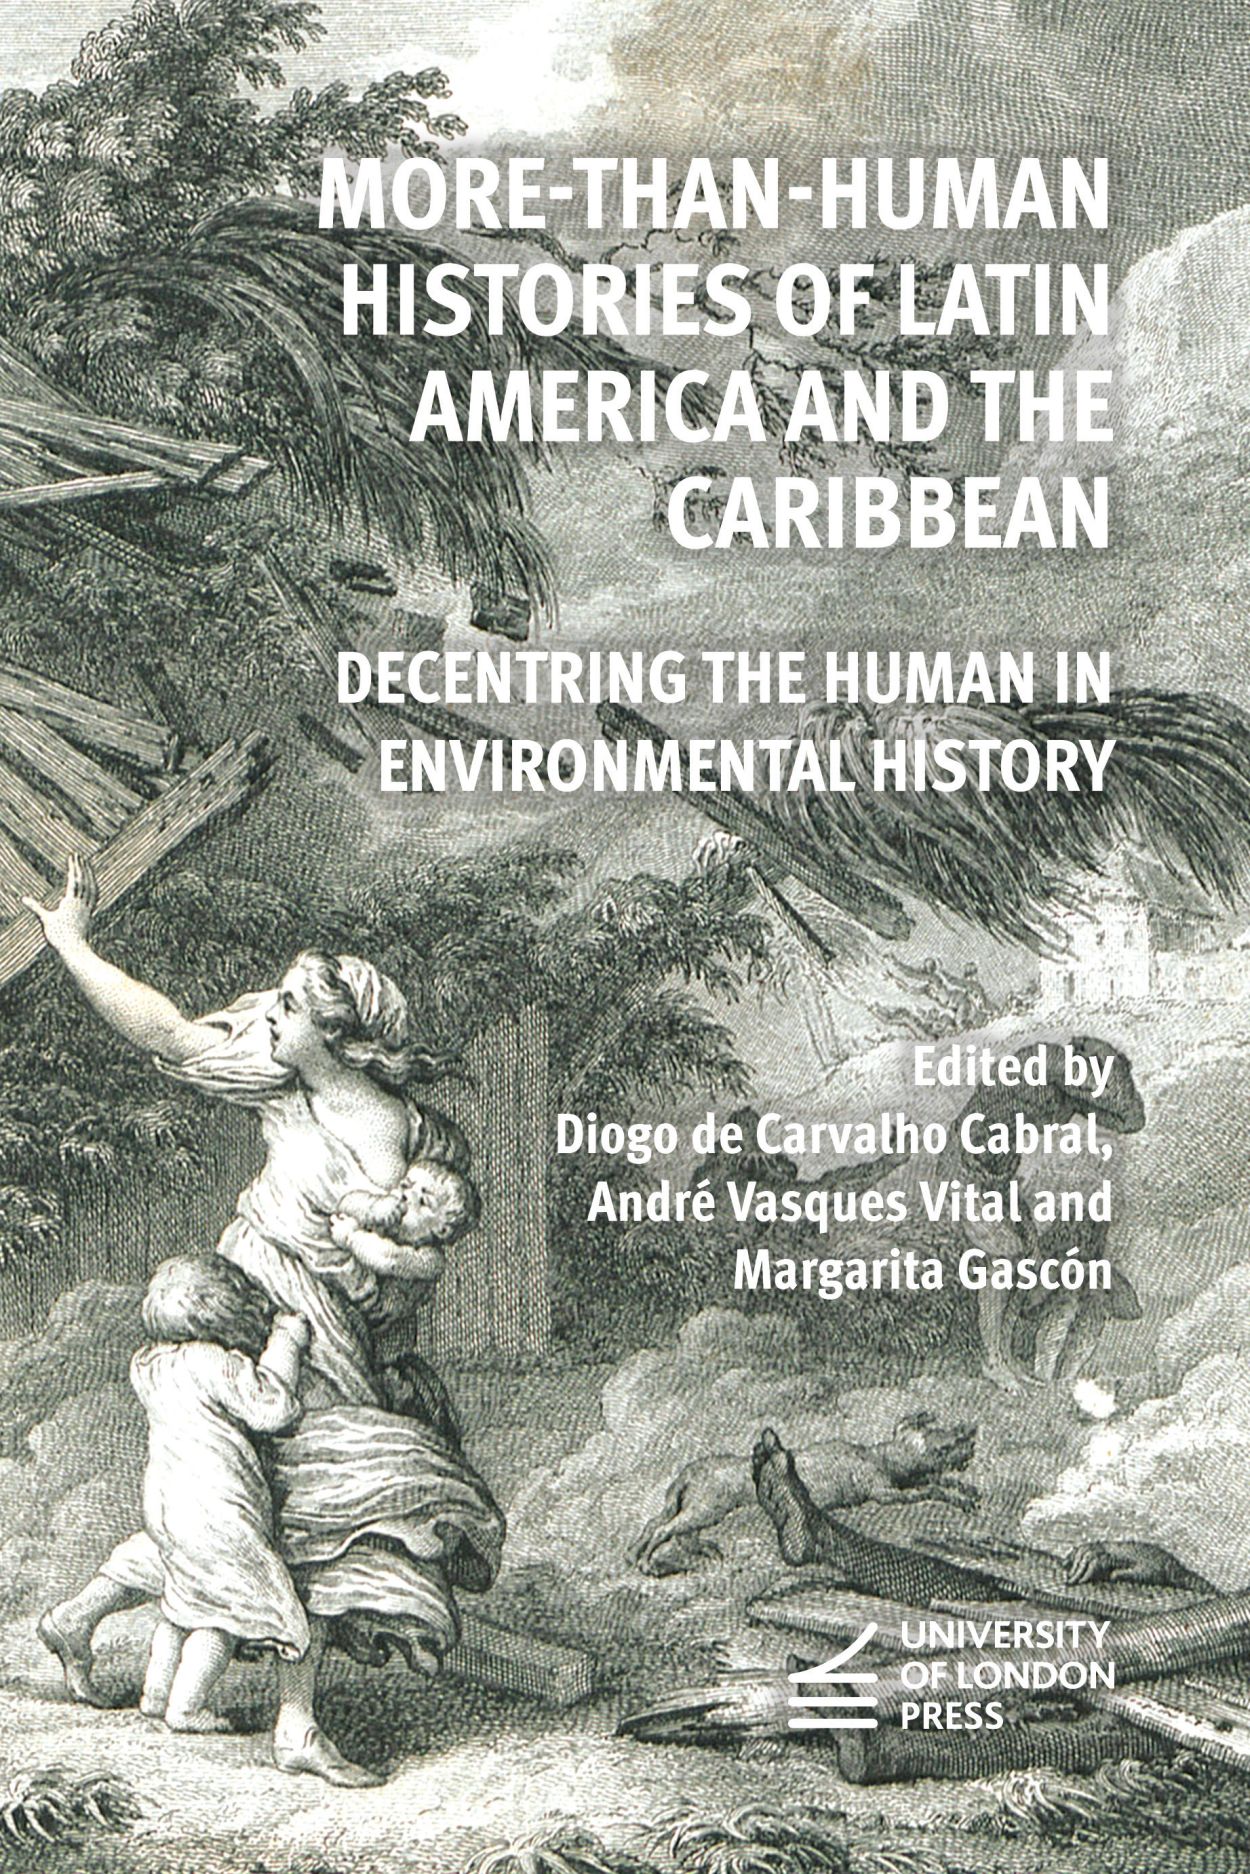 A genetic history of the pre-contact Caribbean